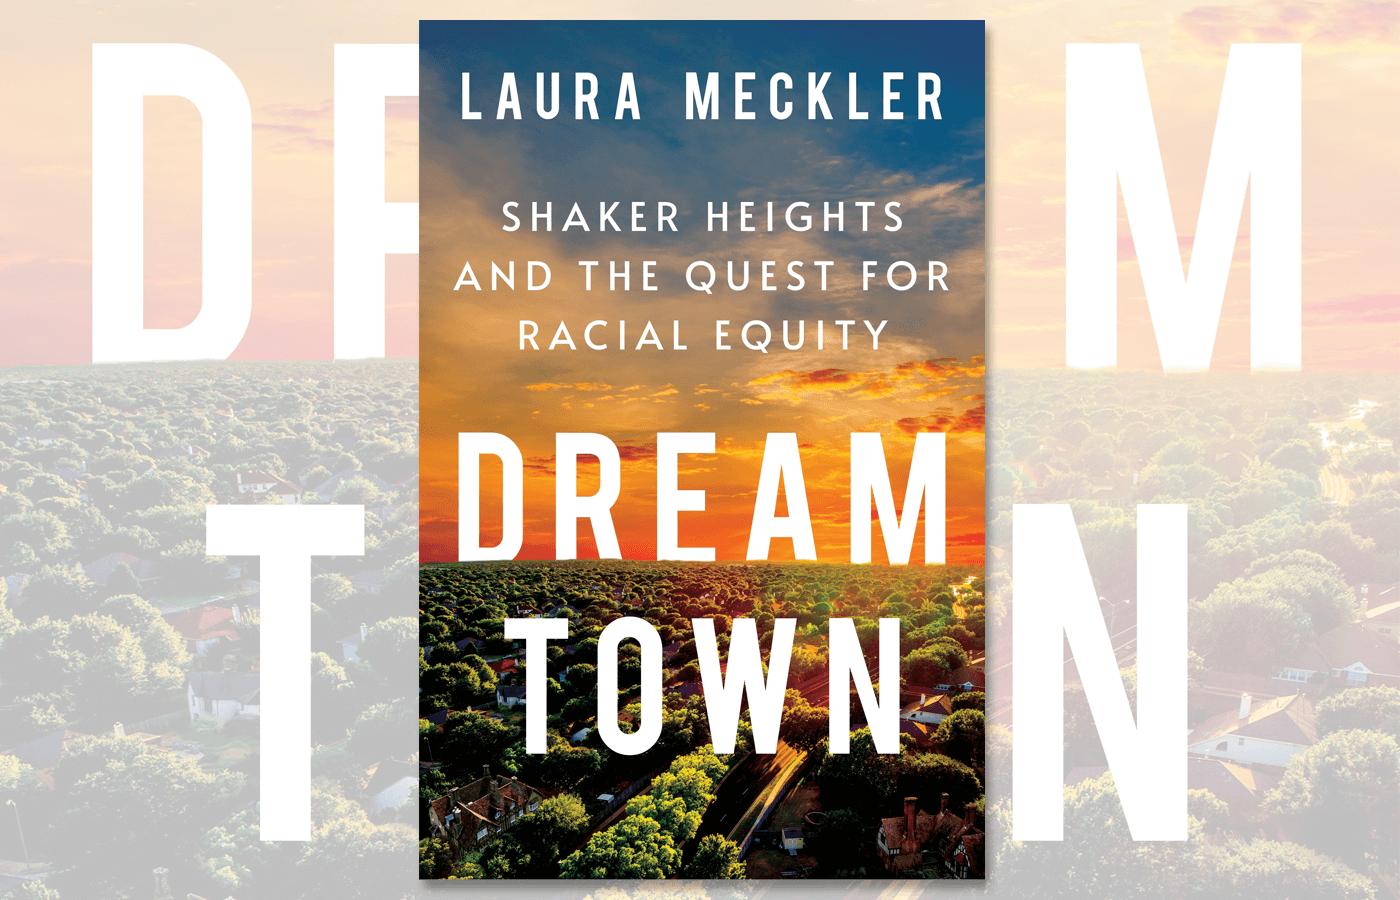 Cover of "Dream Town" by Laura Meckler